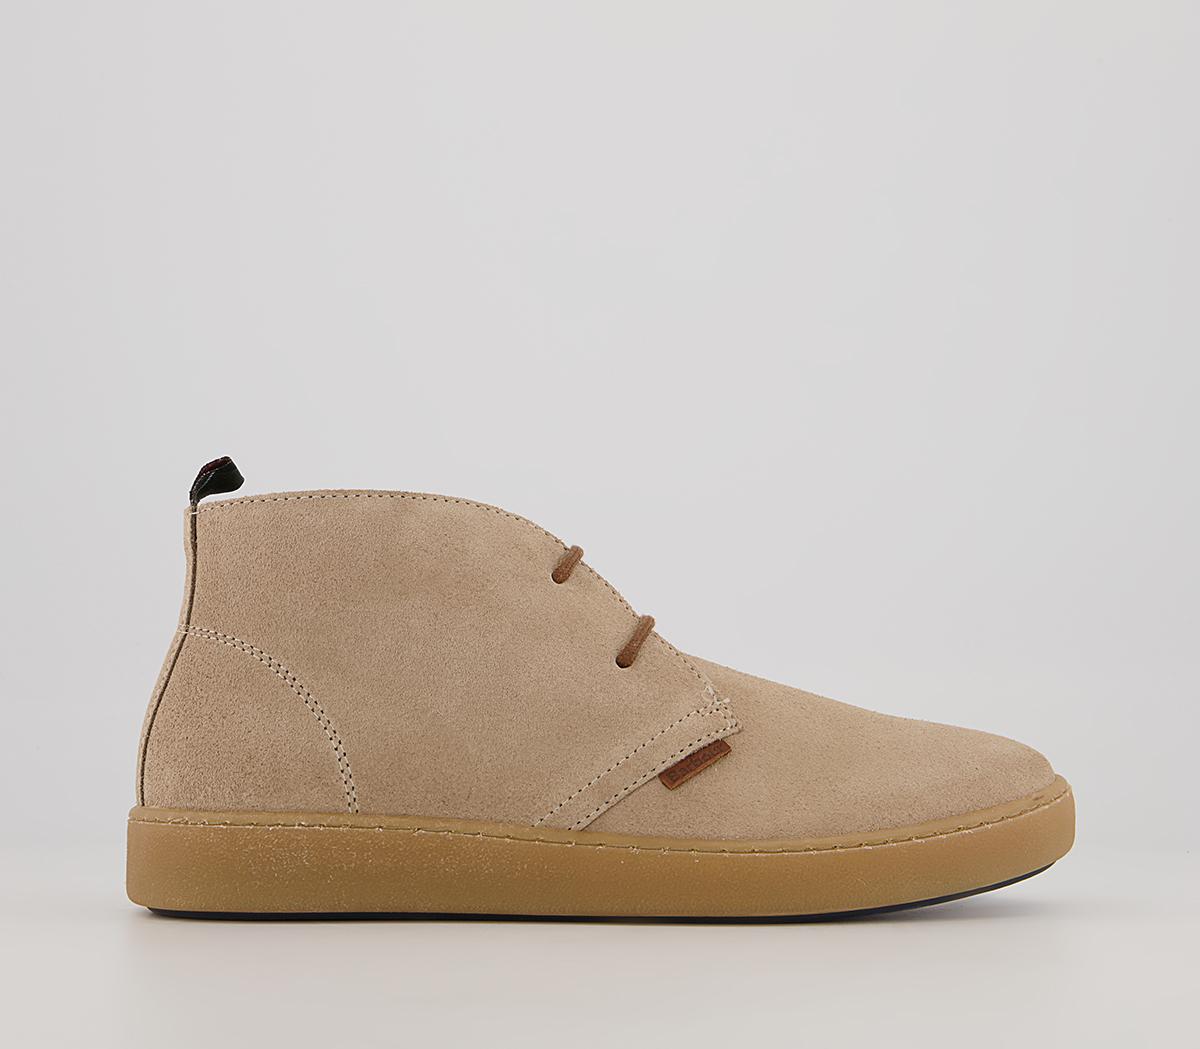 Barbour Yuma Chukka Boots Sand Suede - Men’s Boots